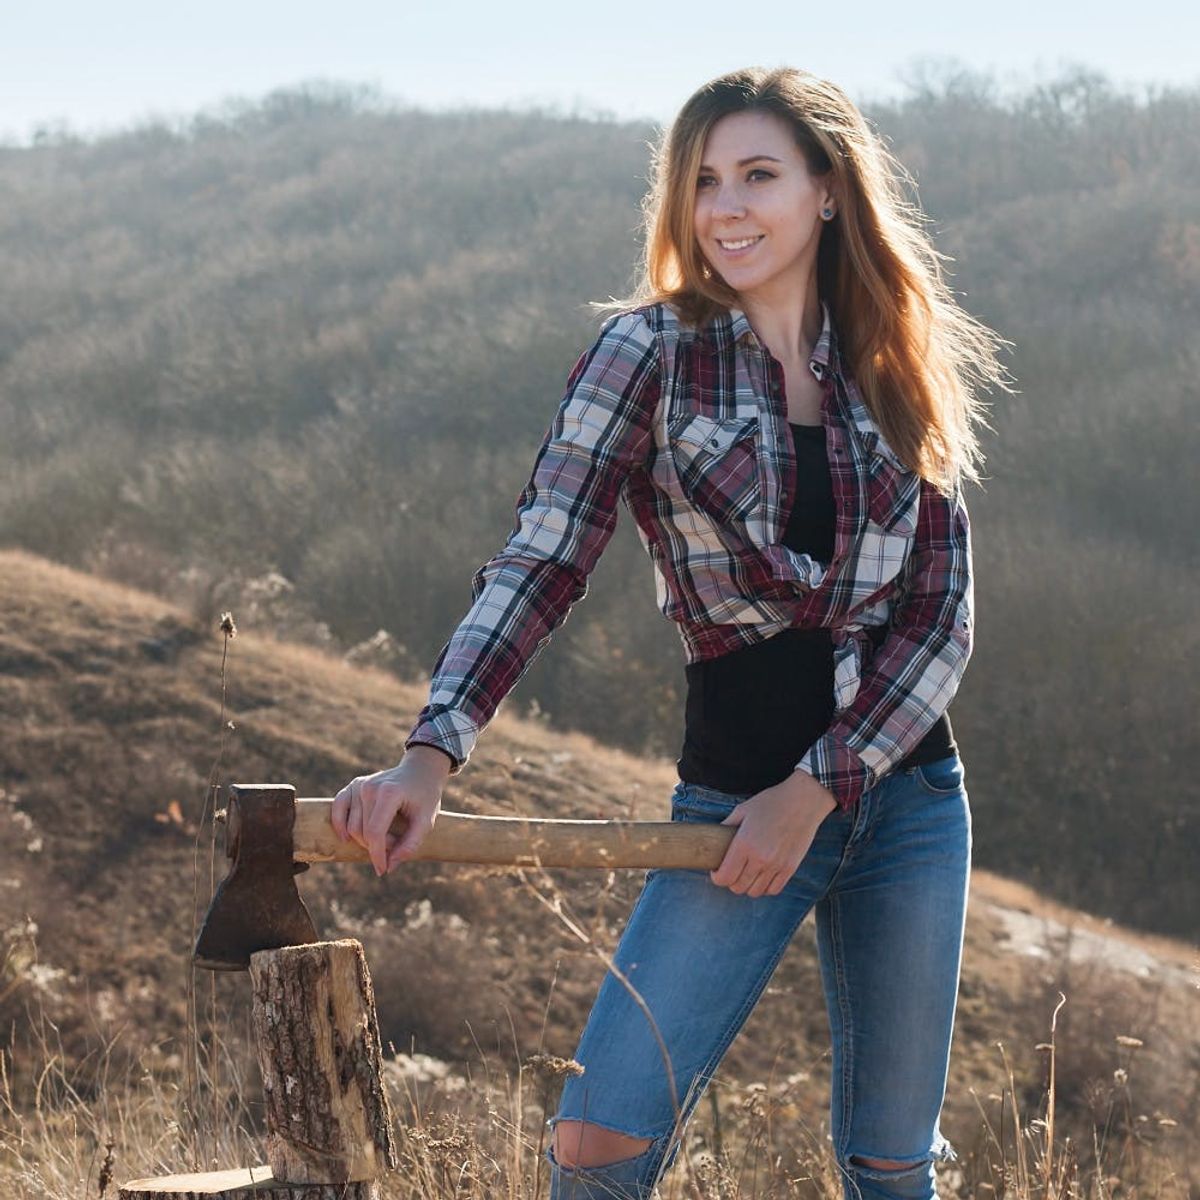 Brawny Is Replacing Their Iconic Lumberjack Dude With Women for International Women’s Day